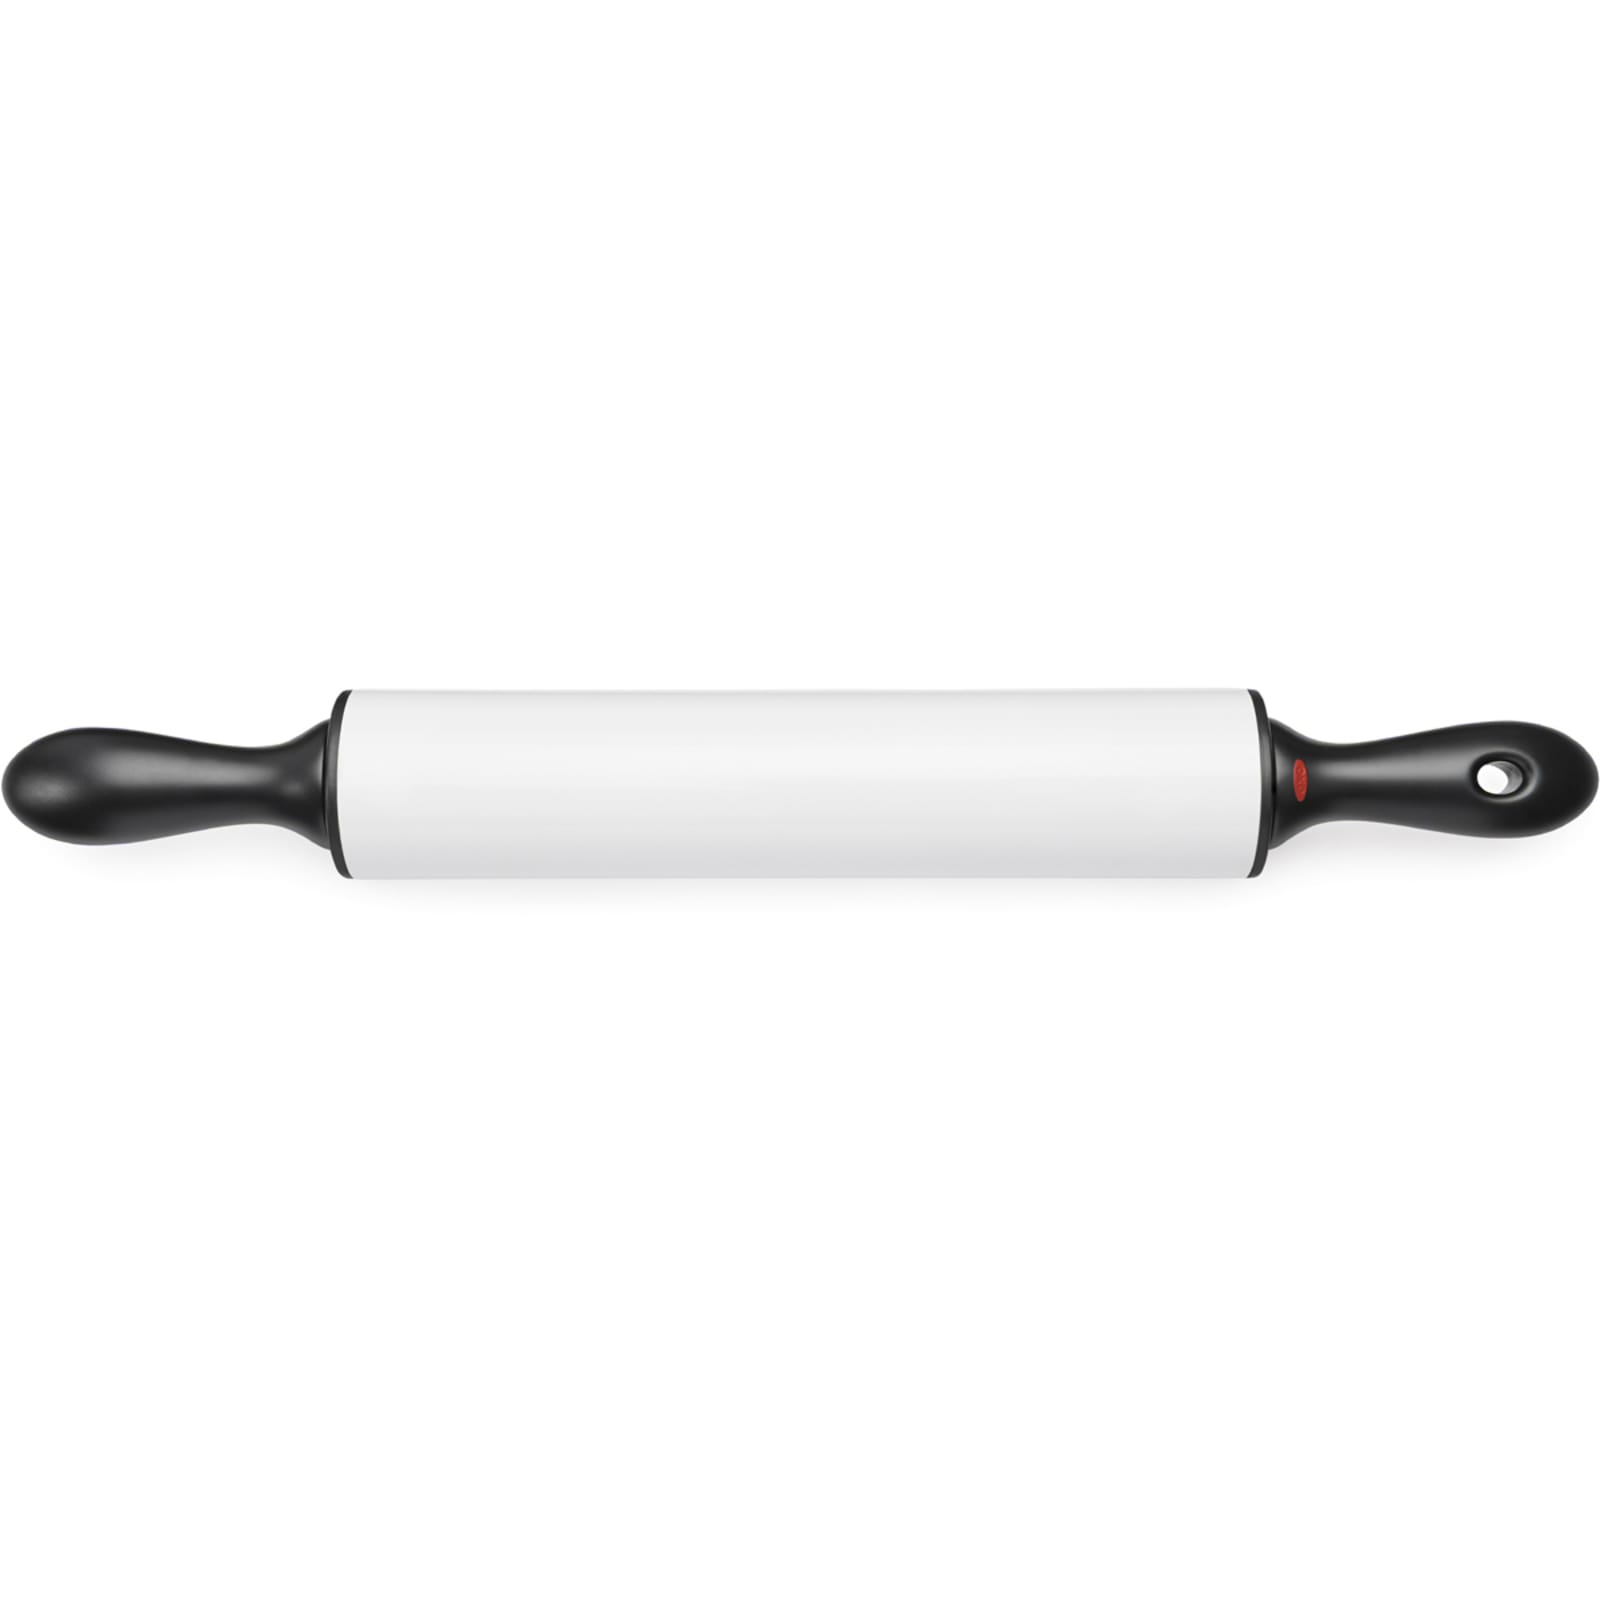 OXO Non-Stick Rolling Pins